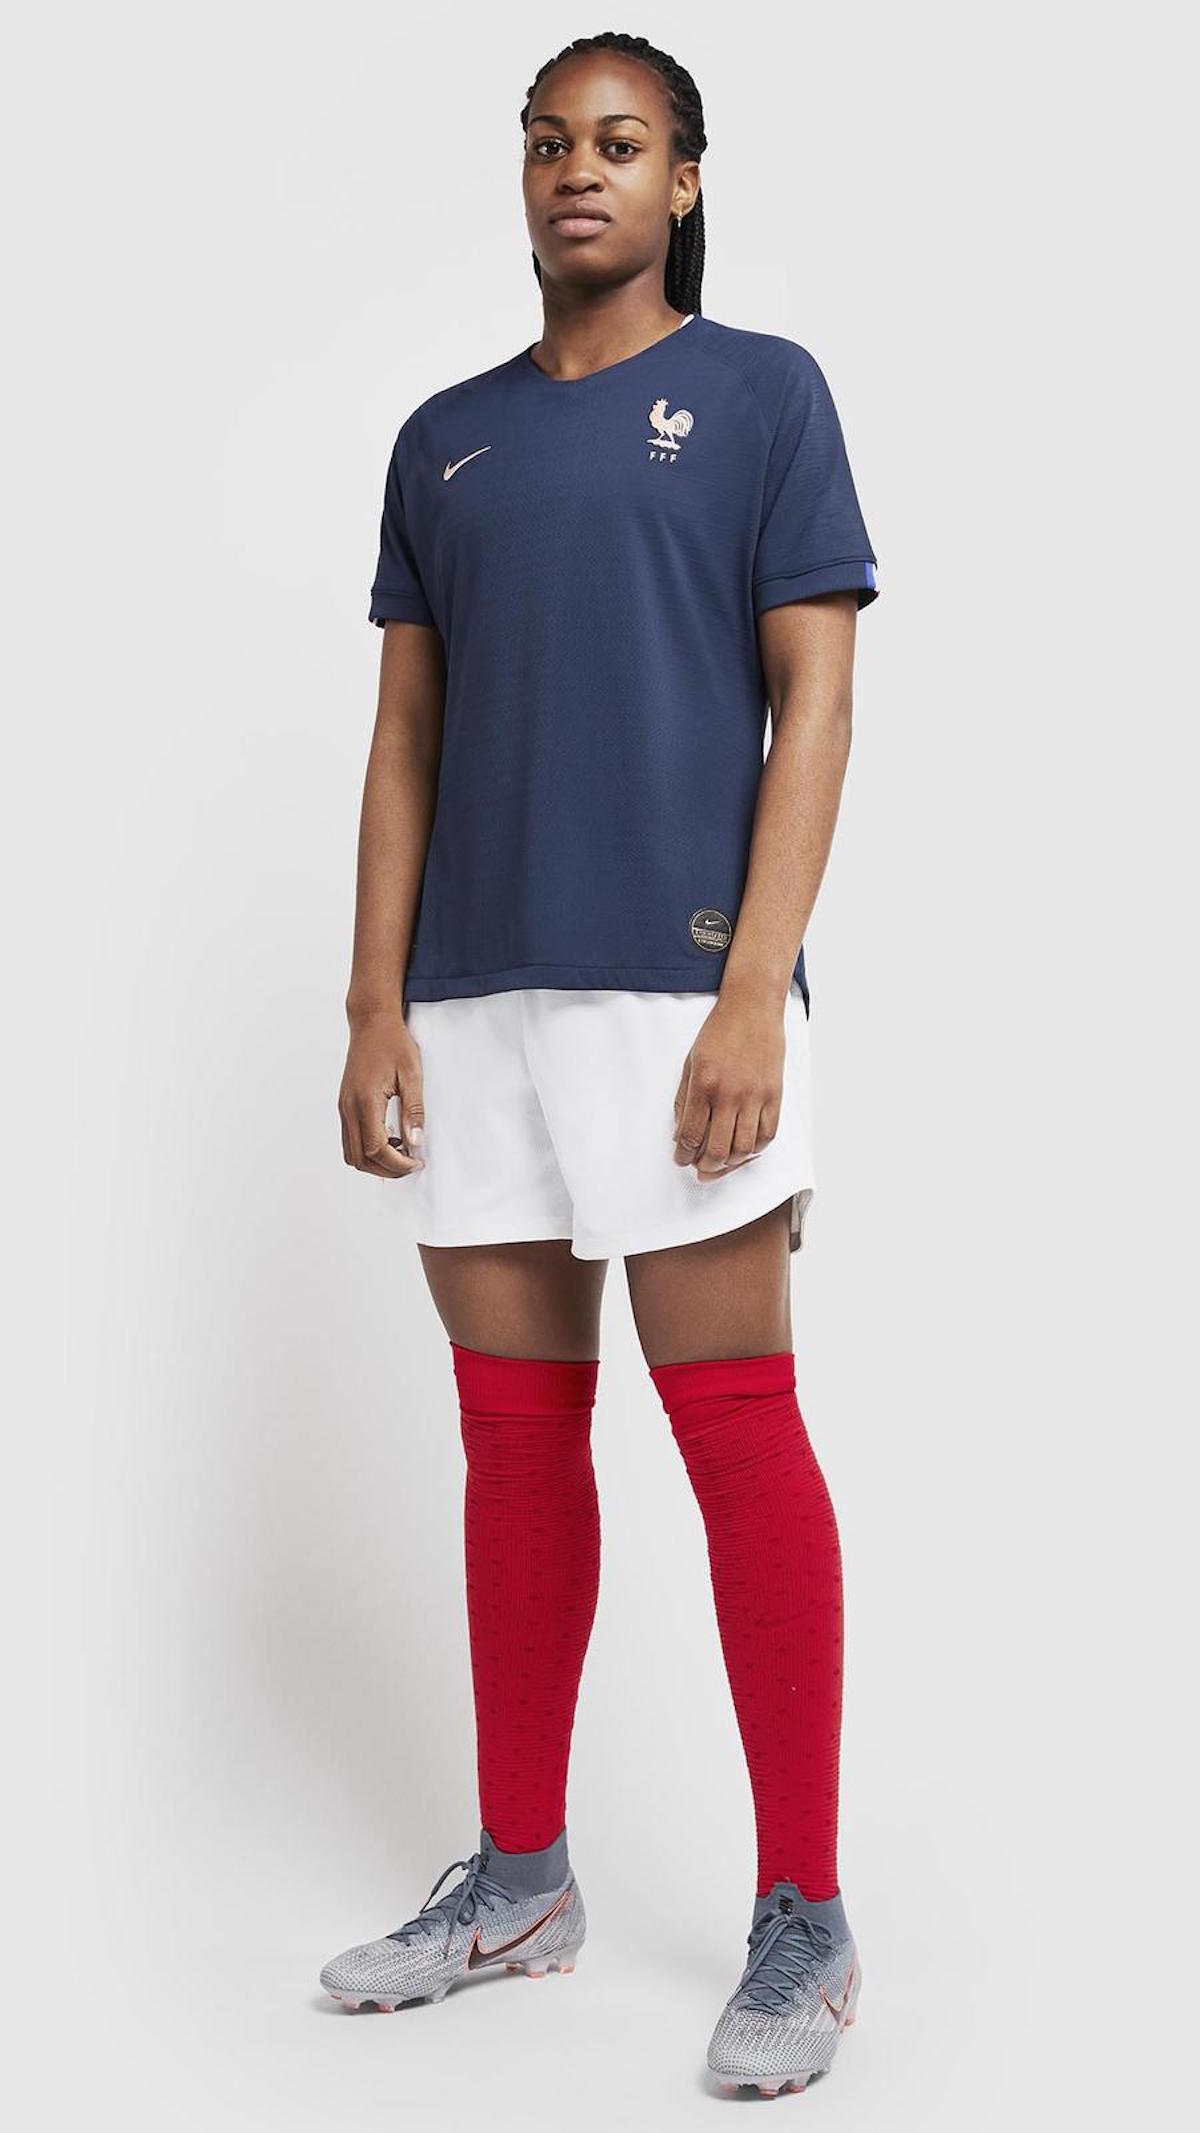 french women's jersey